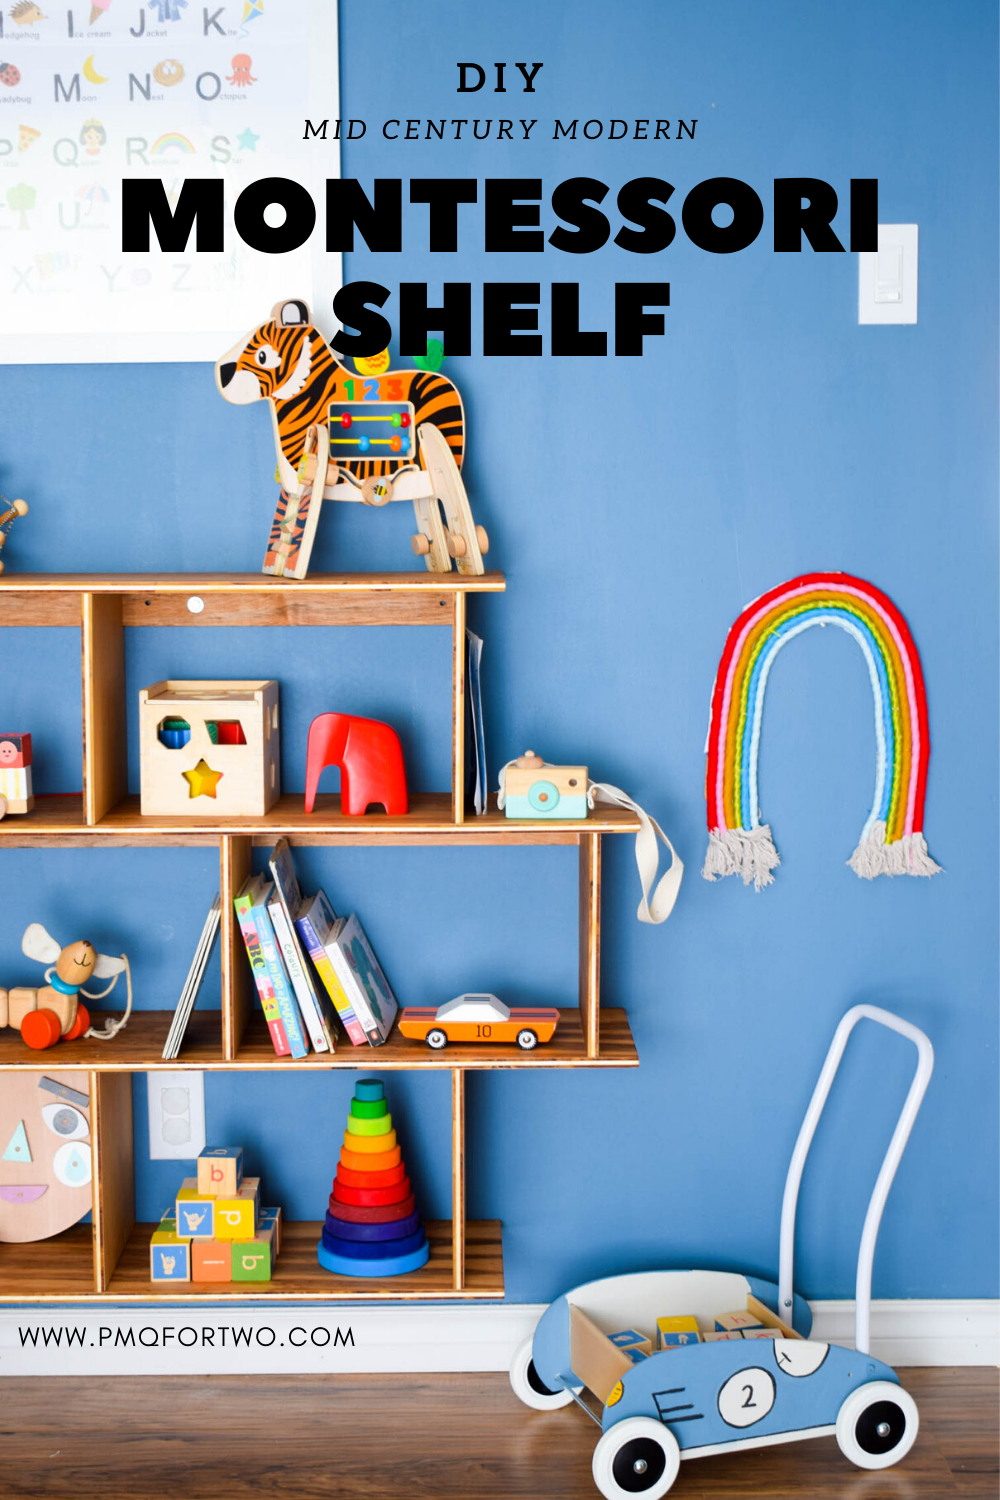 Embrace the Montessori method with an easy to access toy set-up for your kid & marry your decor style, with this DIY Mid Century Modern Montessori Toy Shelf. Full build plans and cut list on the blog.